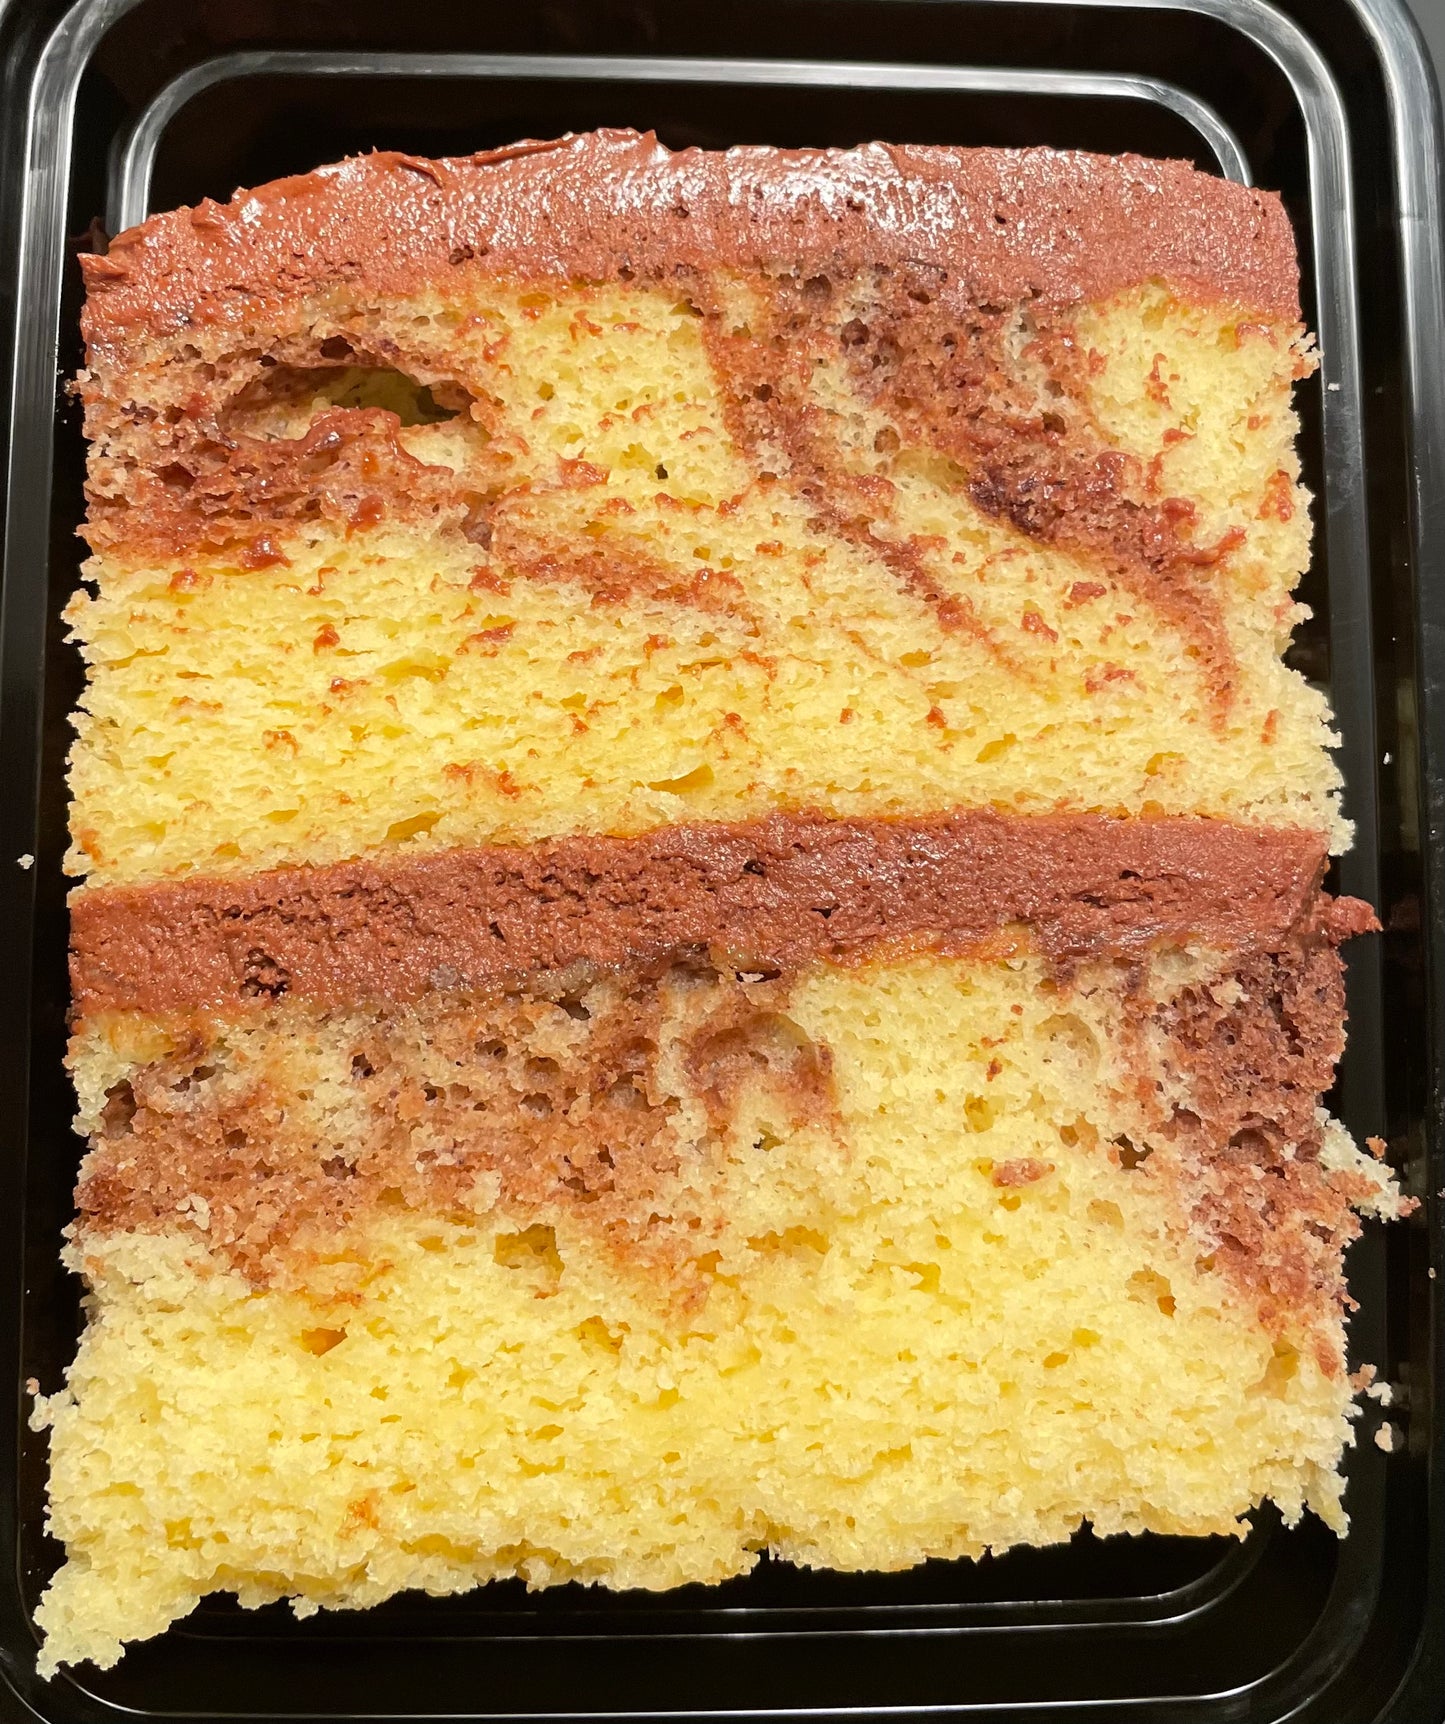 Can't decide on yellow butter cake or chocolate?  Have a slice of marble cake for the best of both worlds! Topped with our creamy chocolate buttercream.